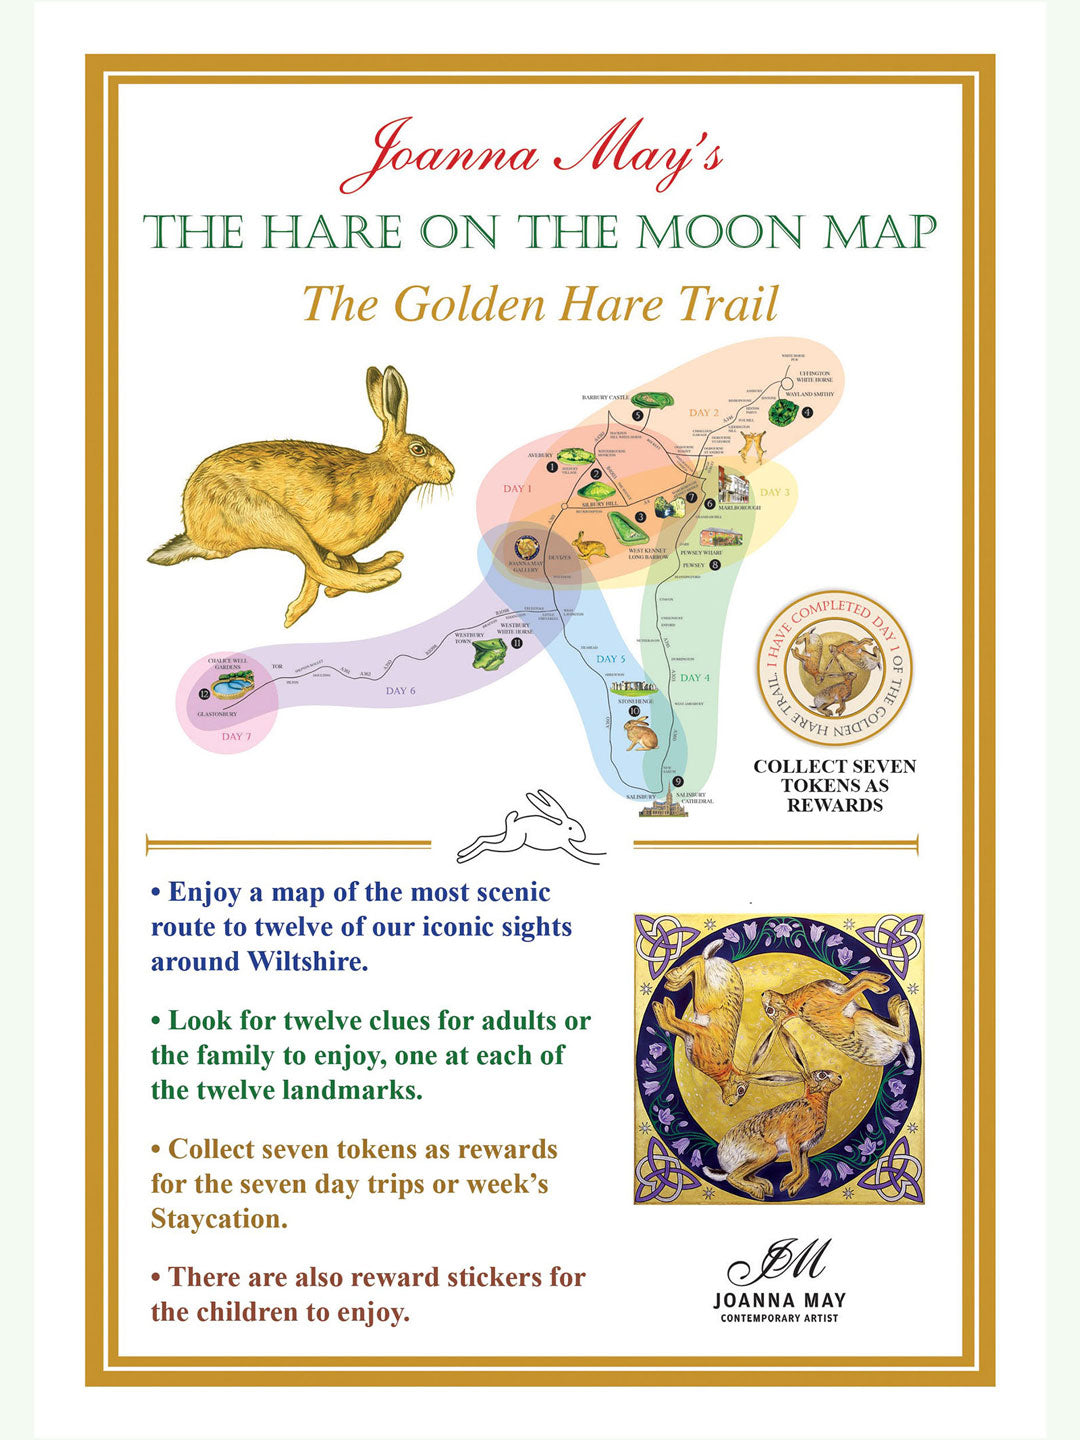 Front cover and map of Joanna's book